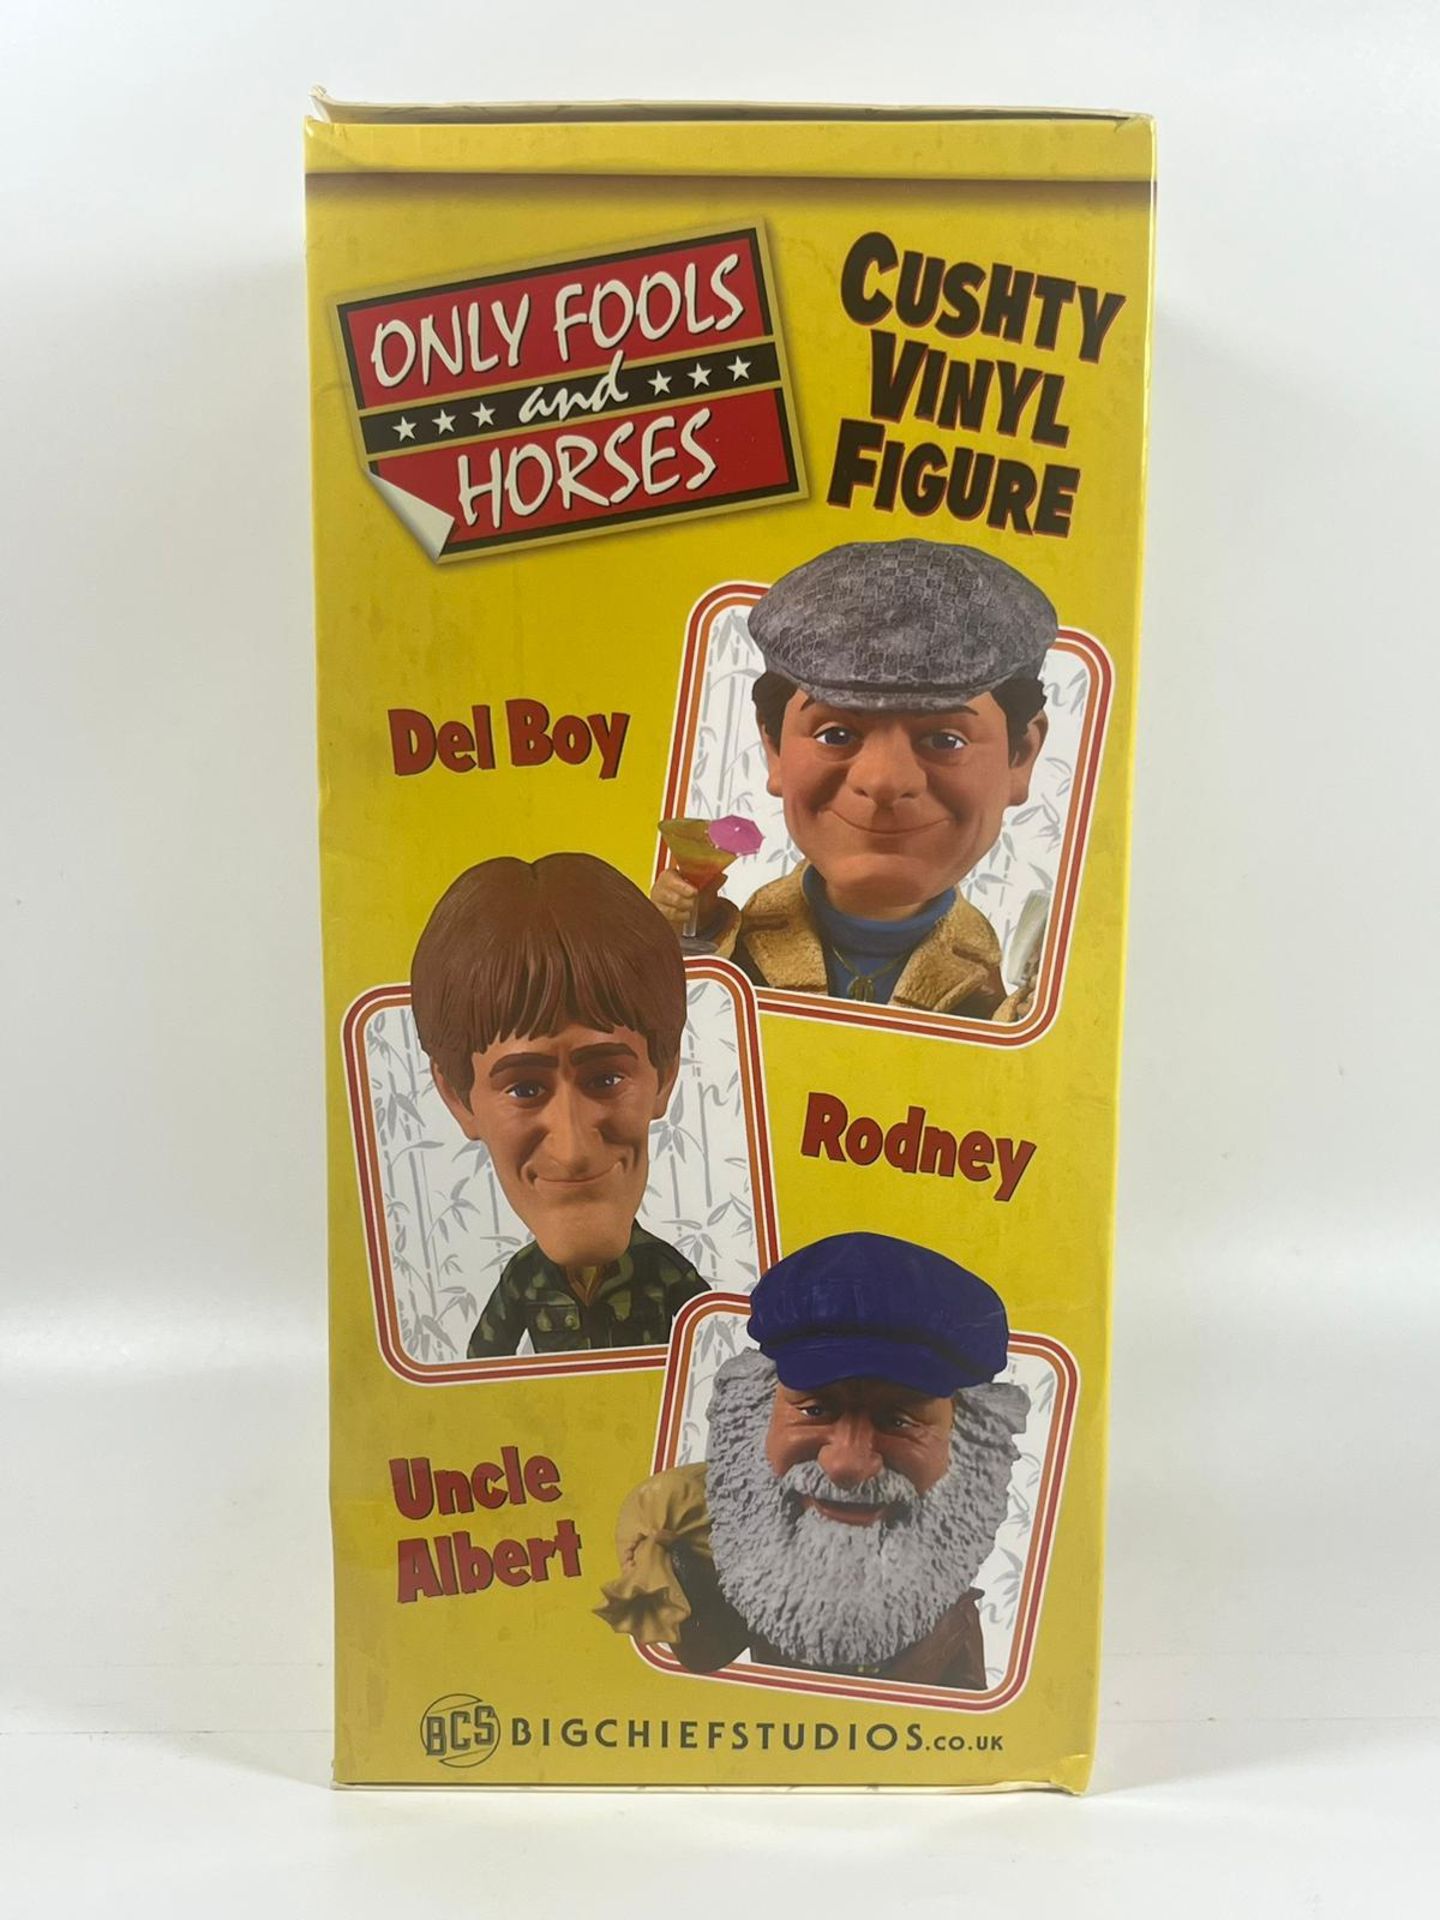 A BOXED ONLY FOOLS AND HORSES CUSHTY VINYL BOBBLEHEAD GOLD RODNEY FIGURE, 26 X 13 CM - Image 2 of 5